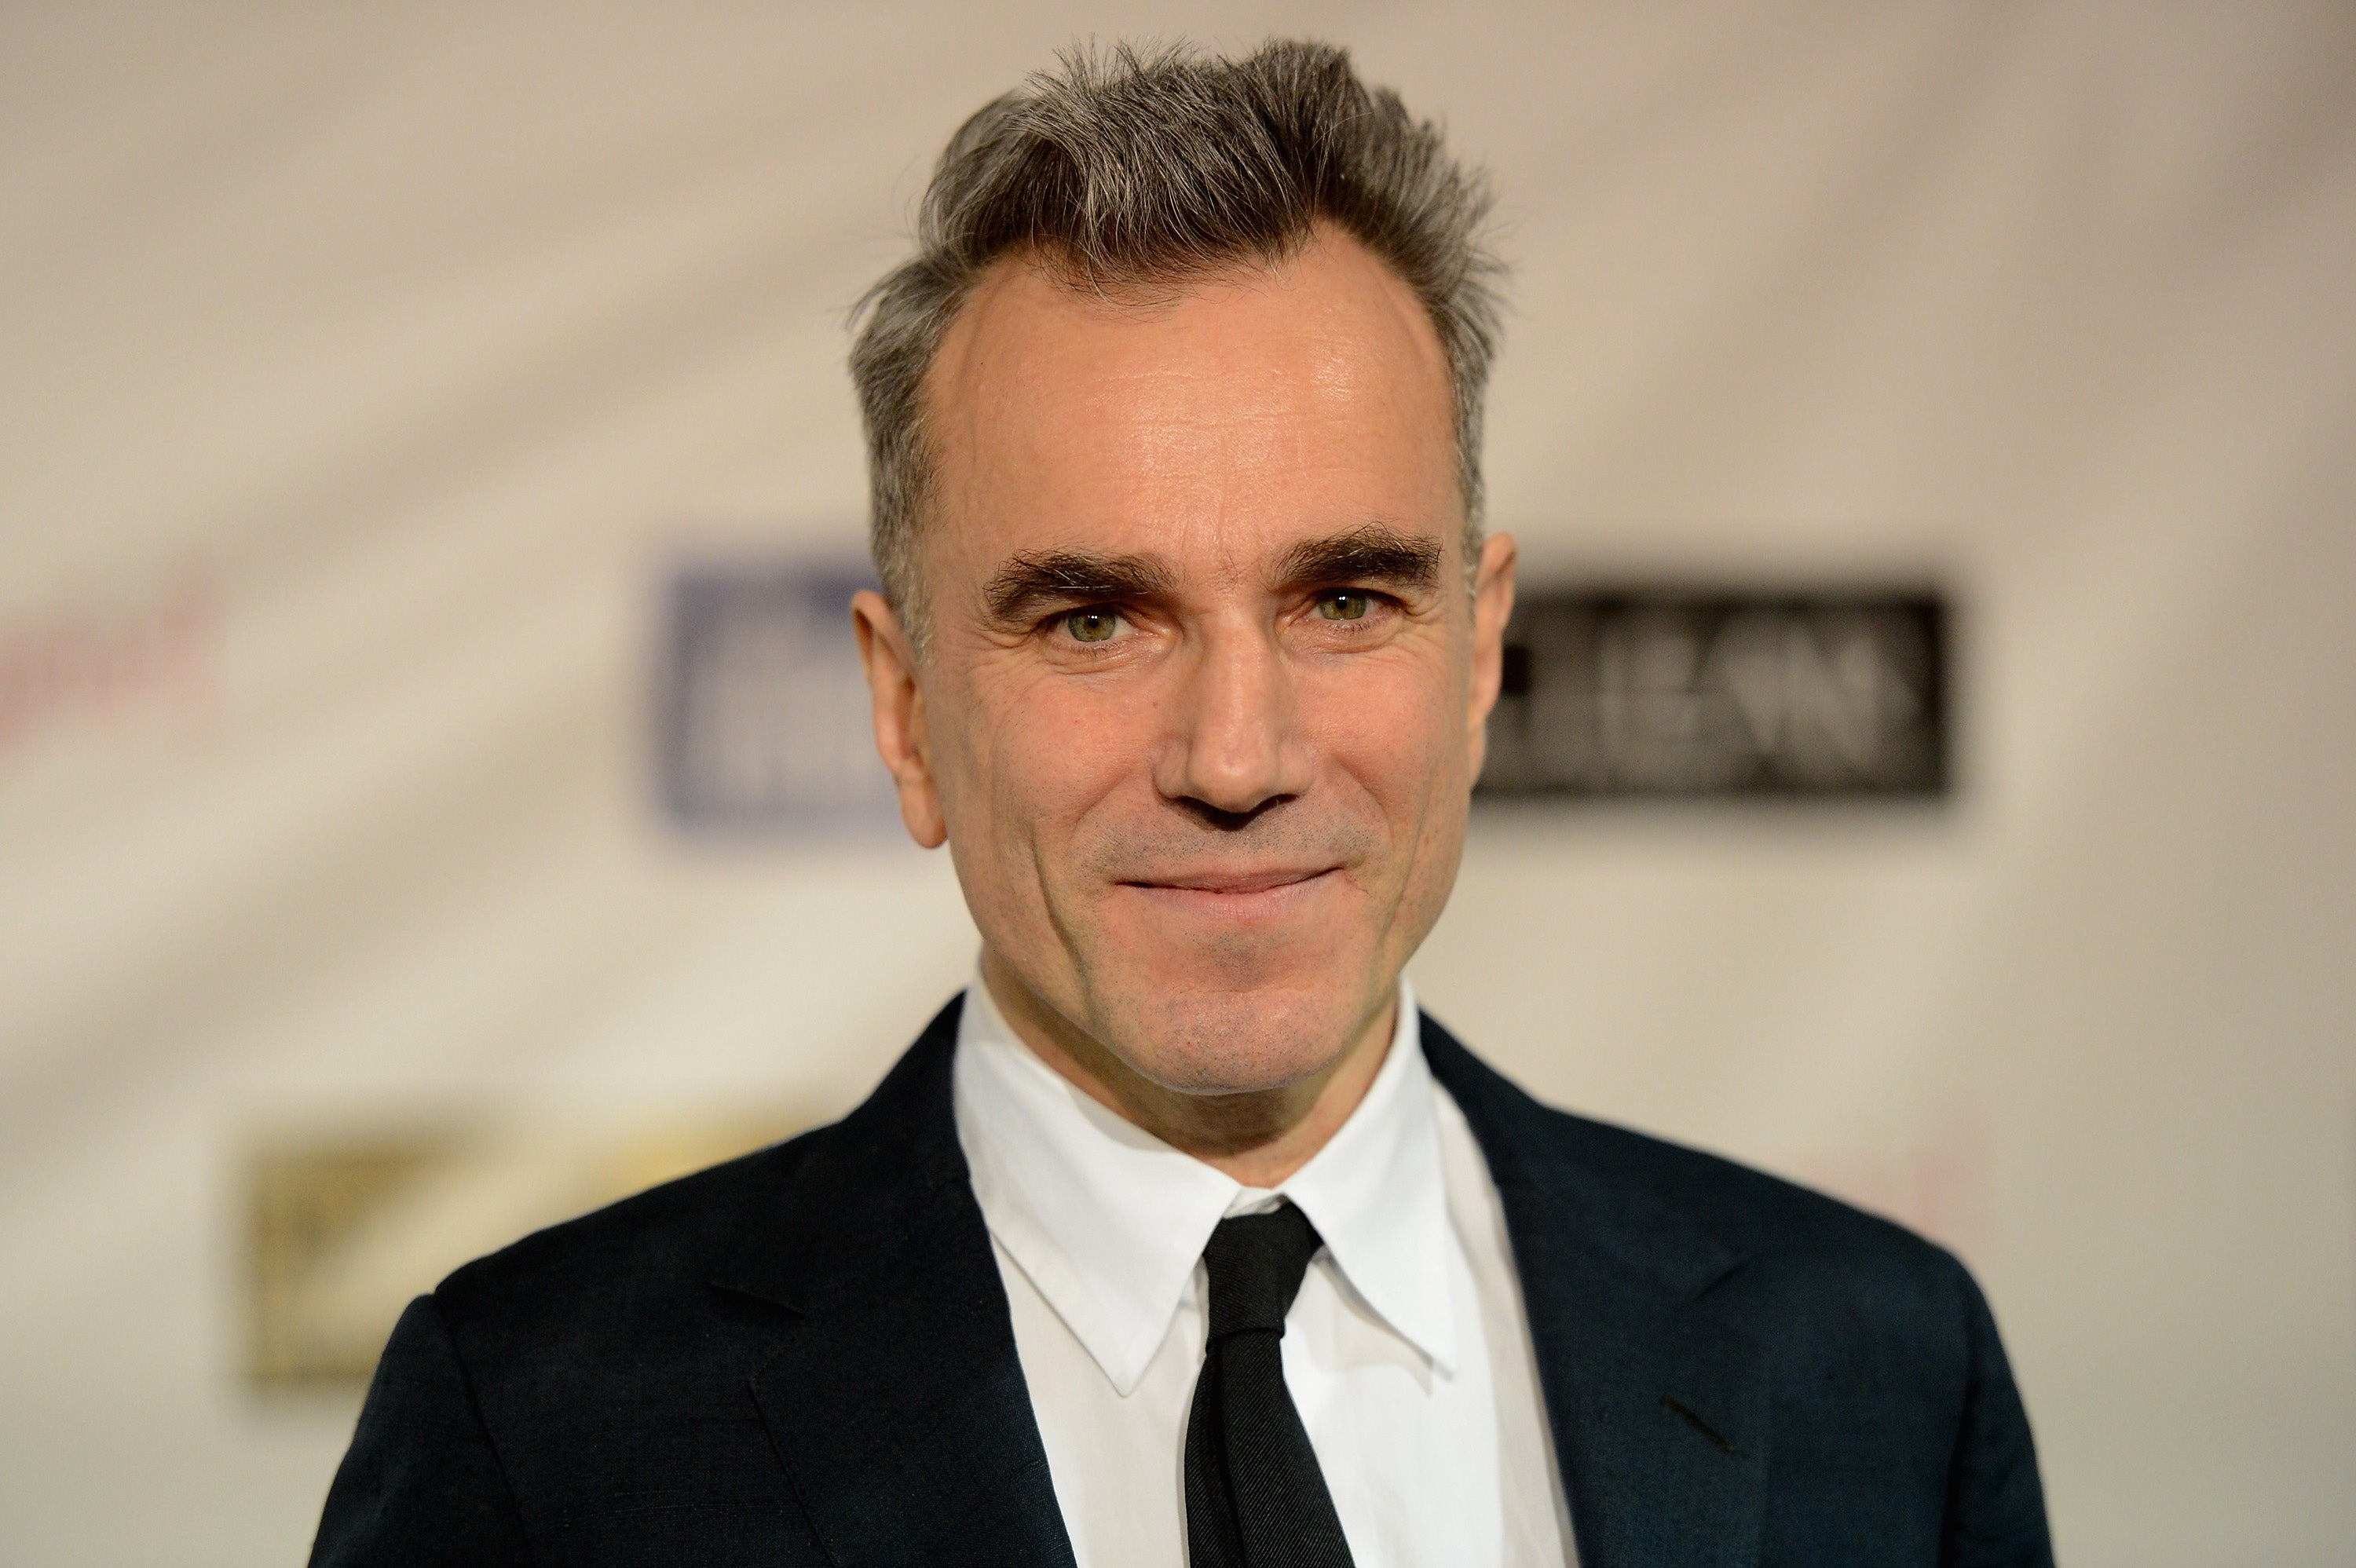 William Boyd has said Daniel Day Lewis would be perfect for James Bond